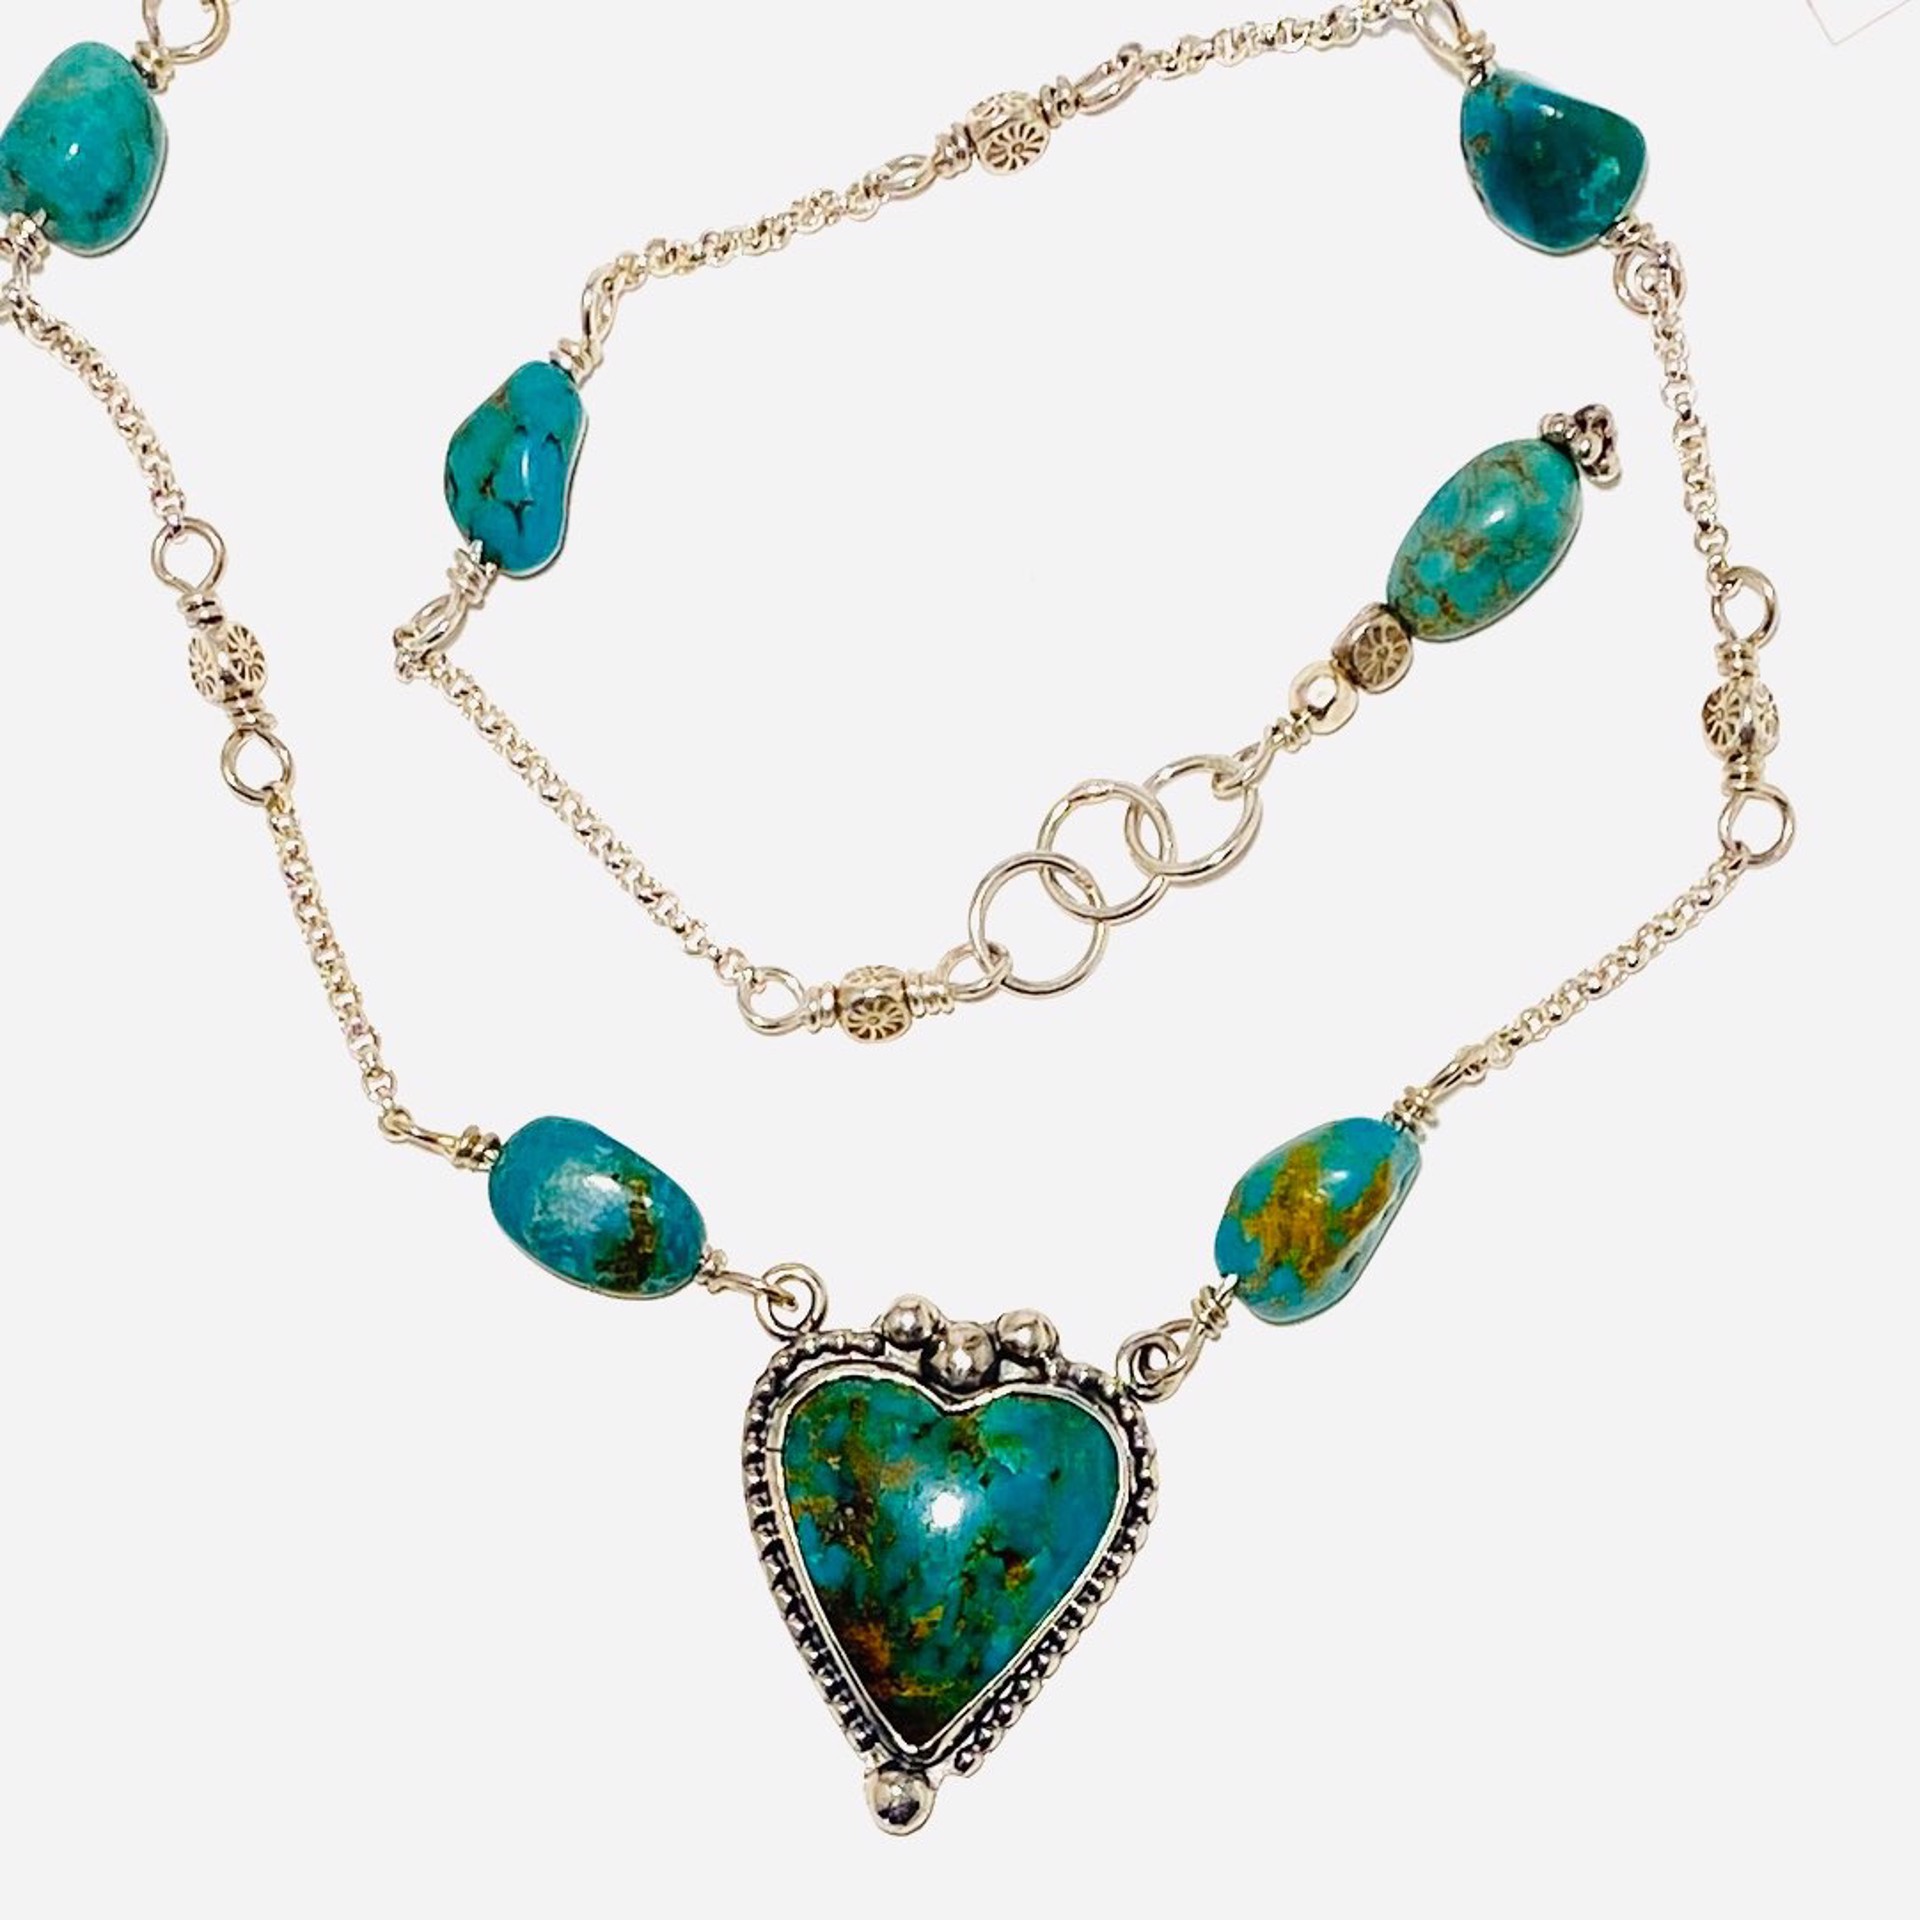 AB23-43 American Turquoise Heart Focal 18”Link and Turquoise Chain  Necklace by Anne Bivens